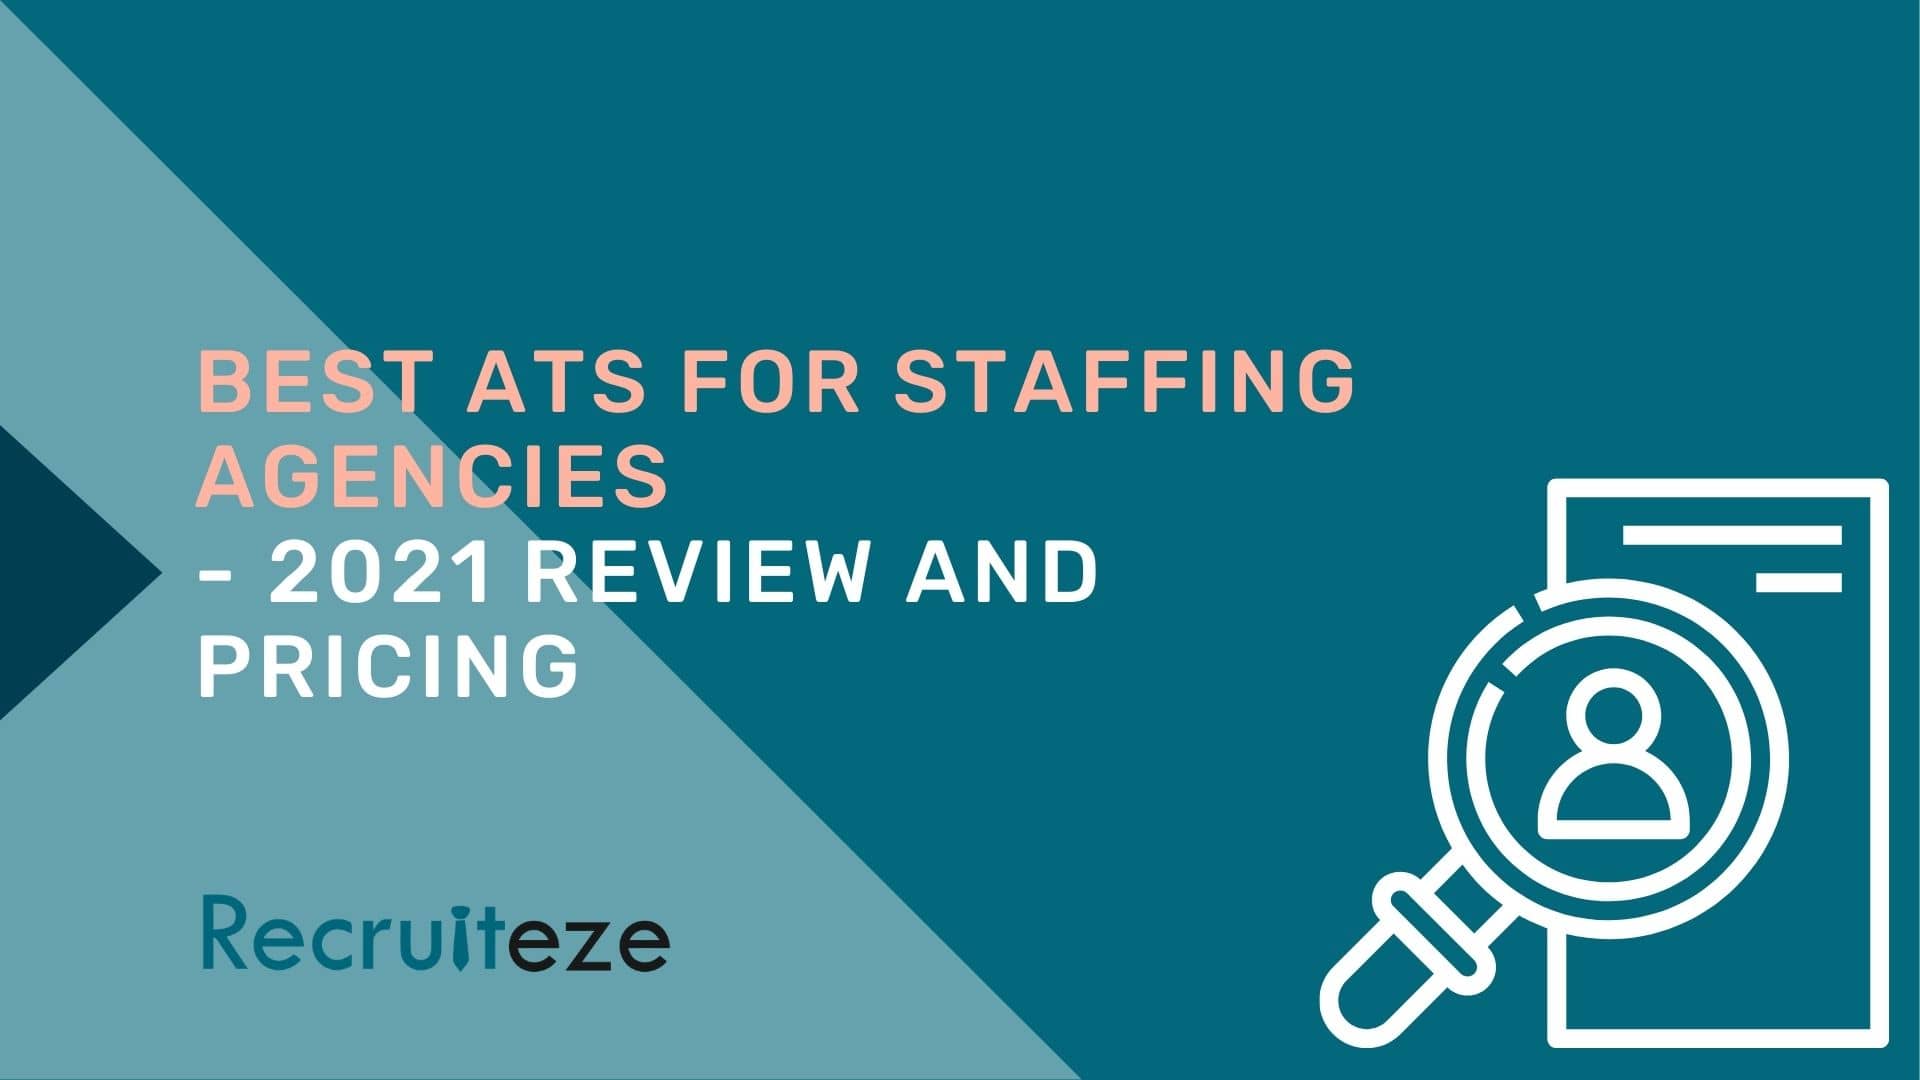 Best ATS for staffing agencies - Recruiteze featured image